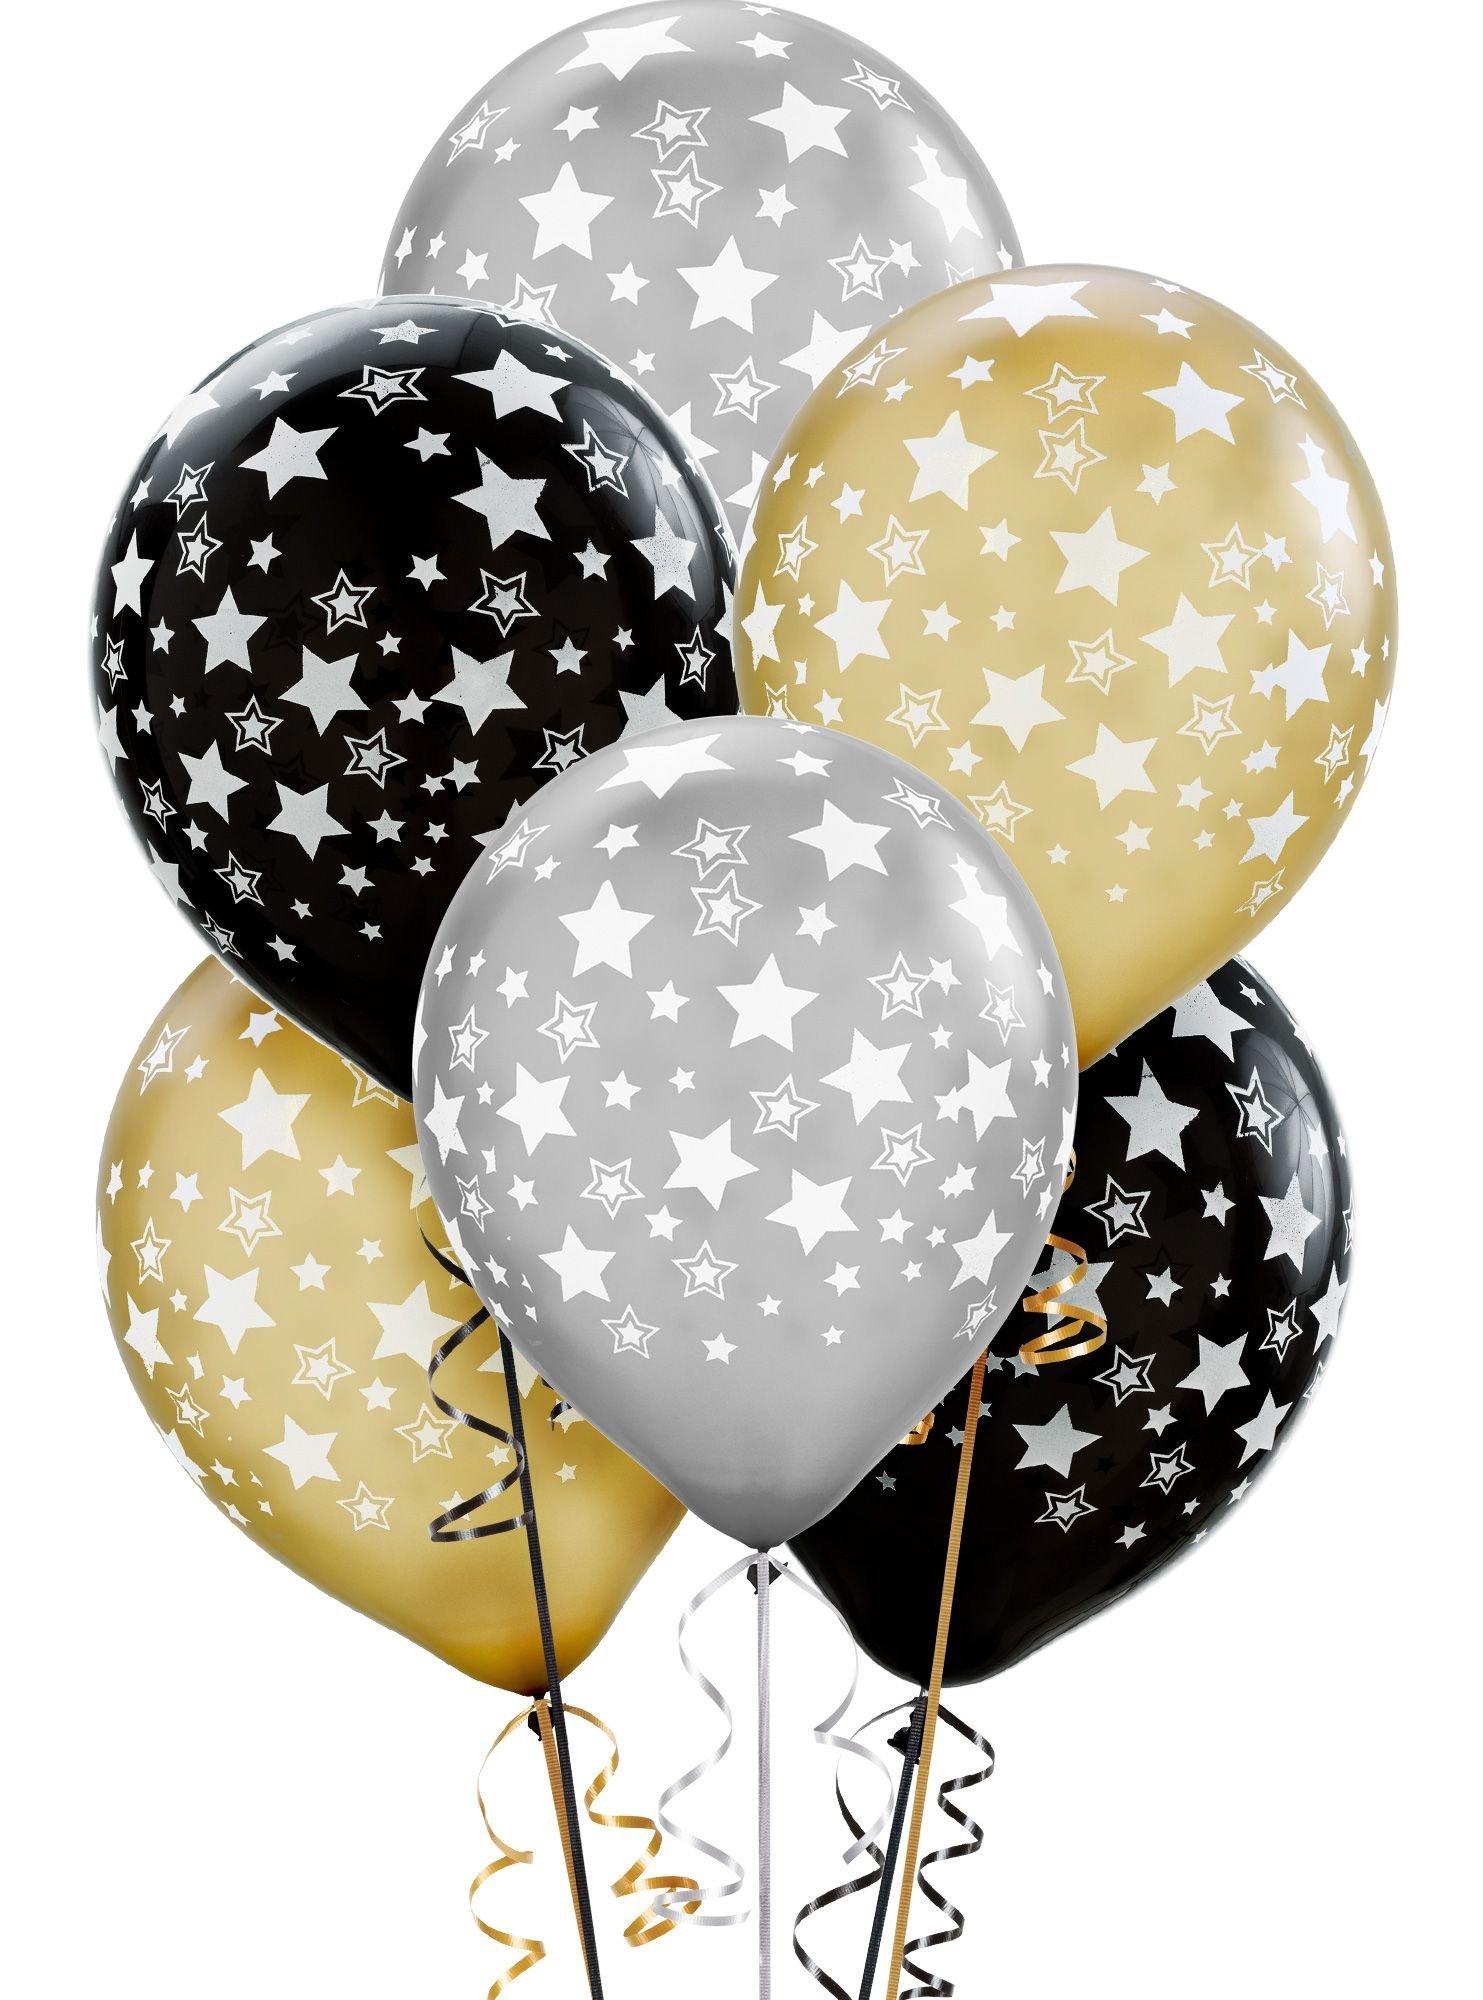 20ct, 12in, Star Balloons - Black, Gold & Silver